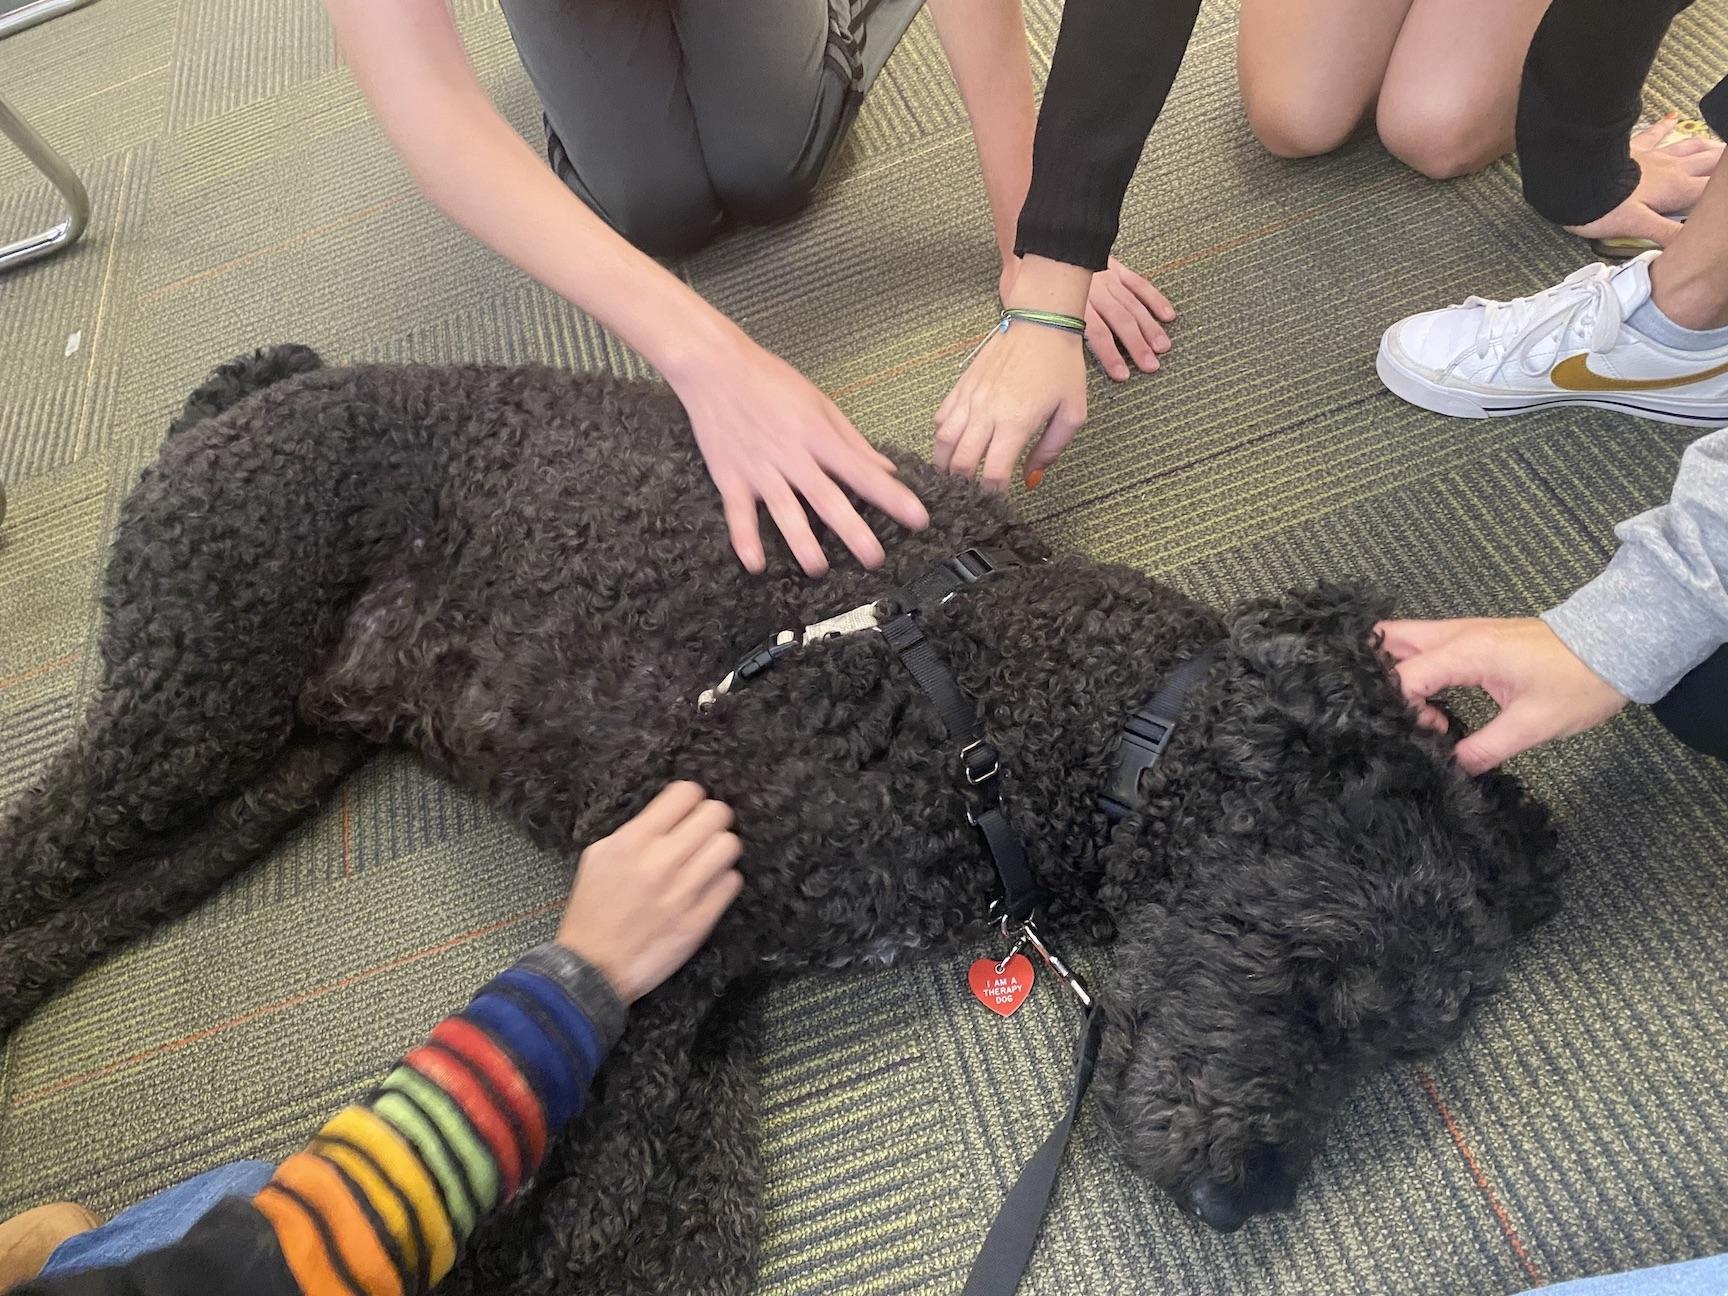 Asher enjoys the attention of students and rolls over for belly rubs